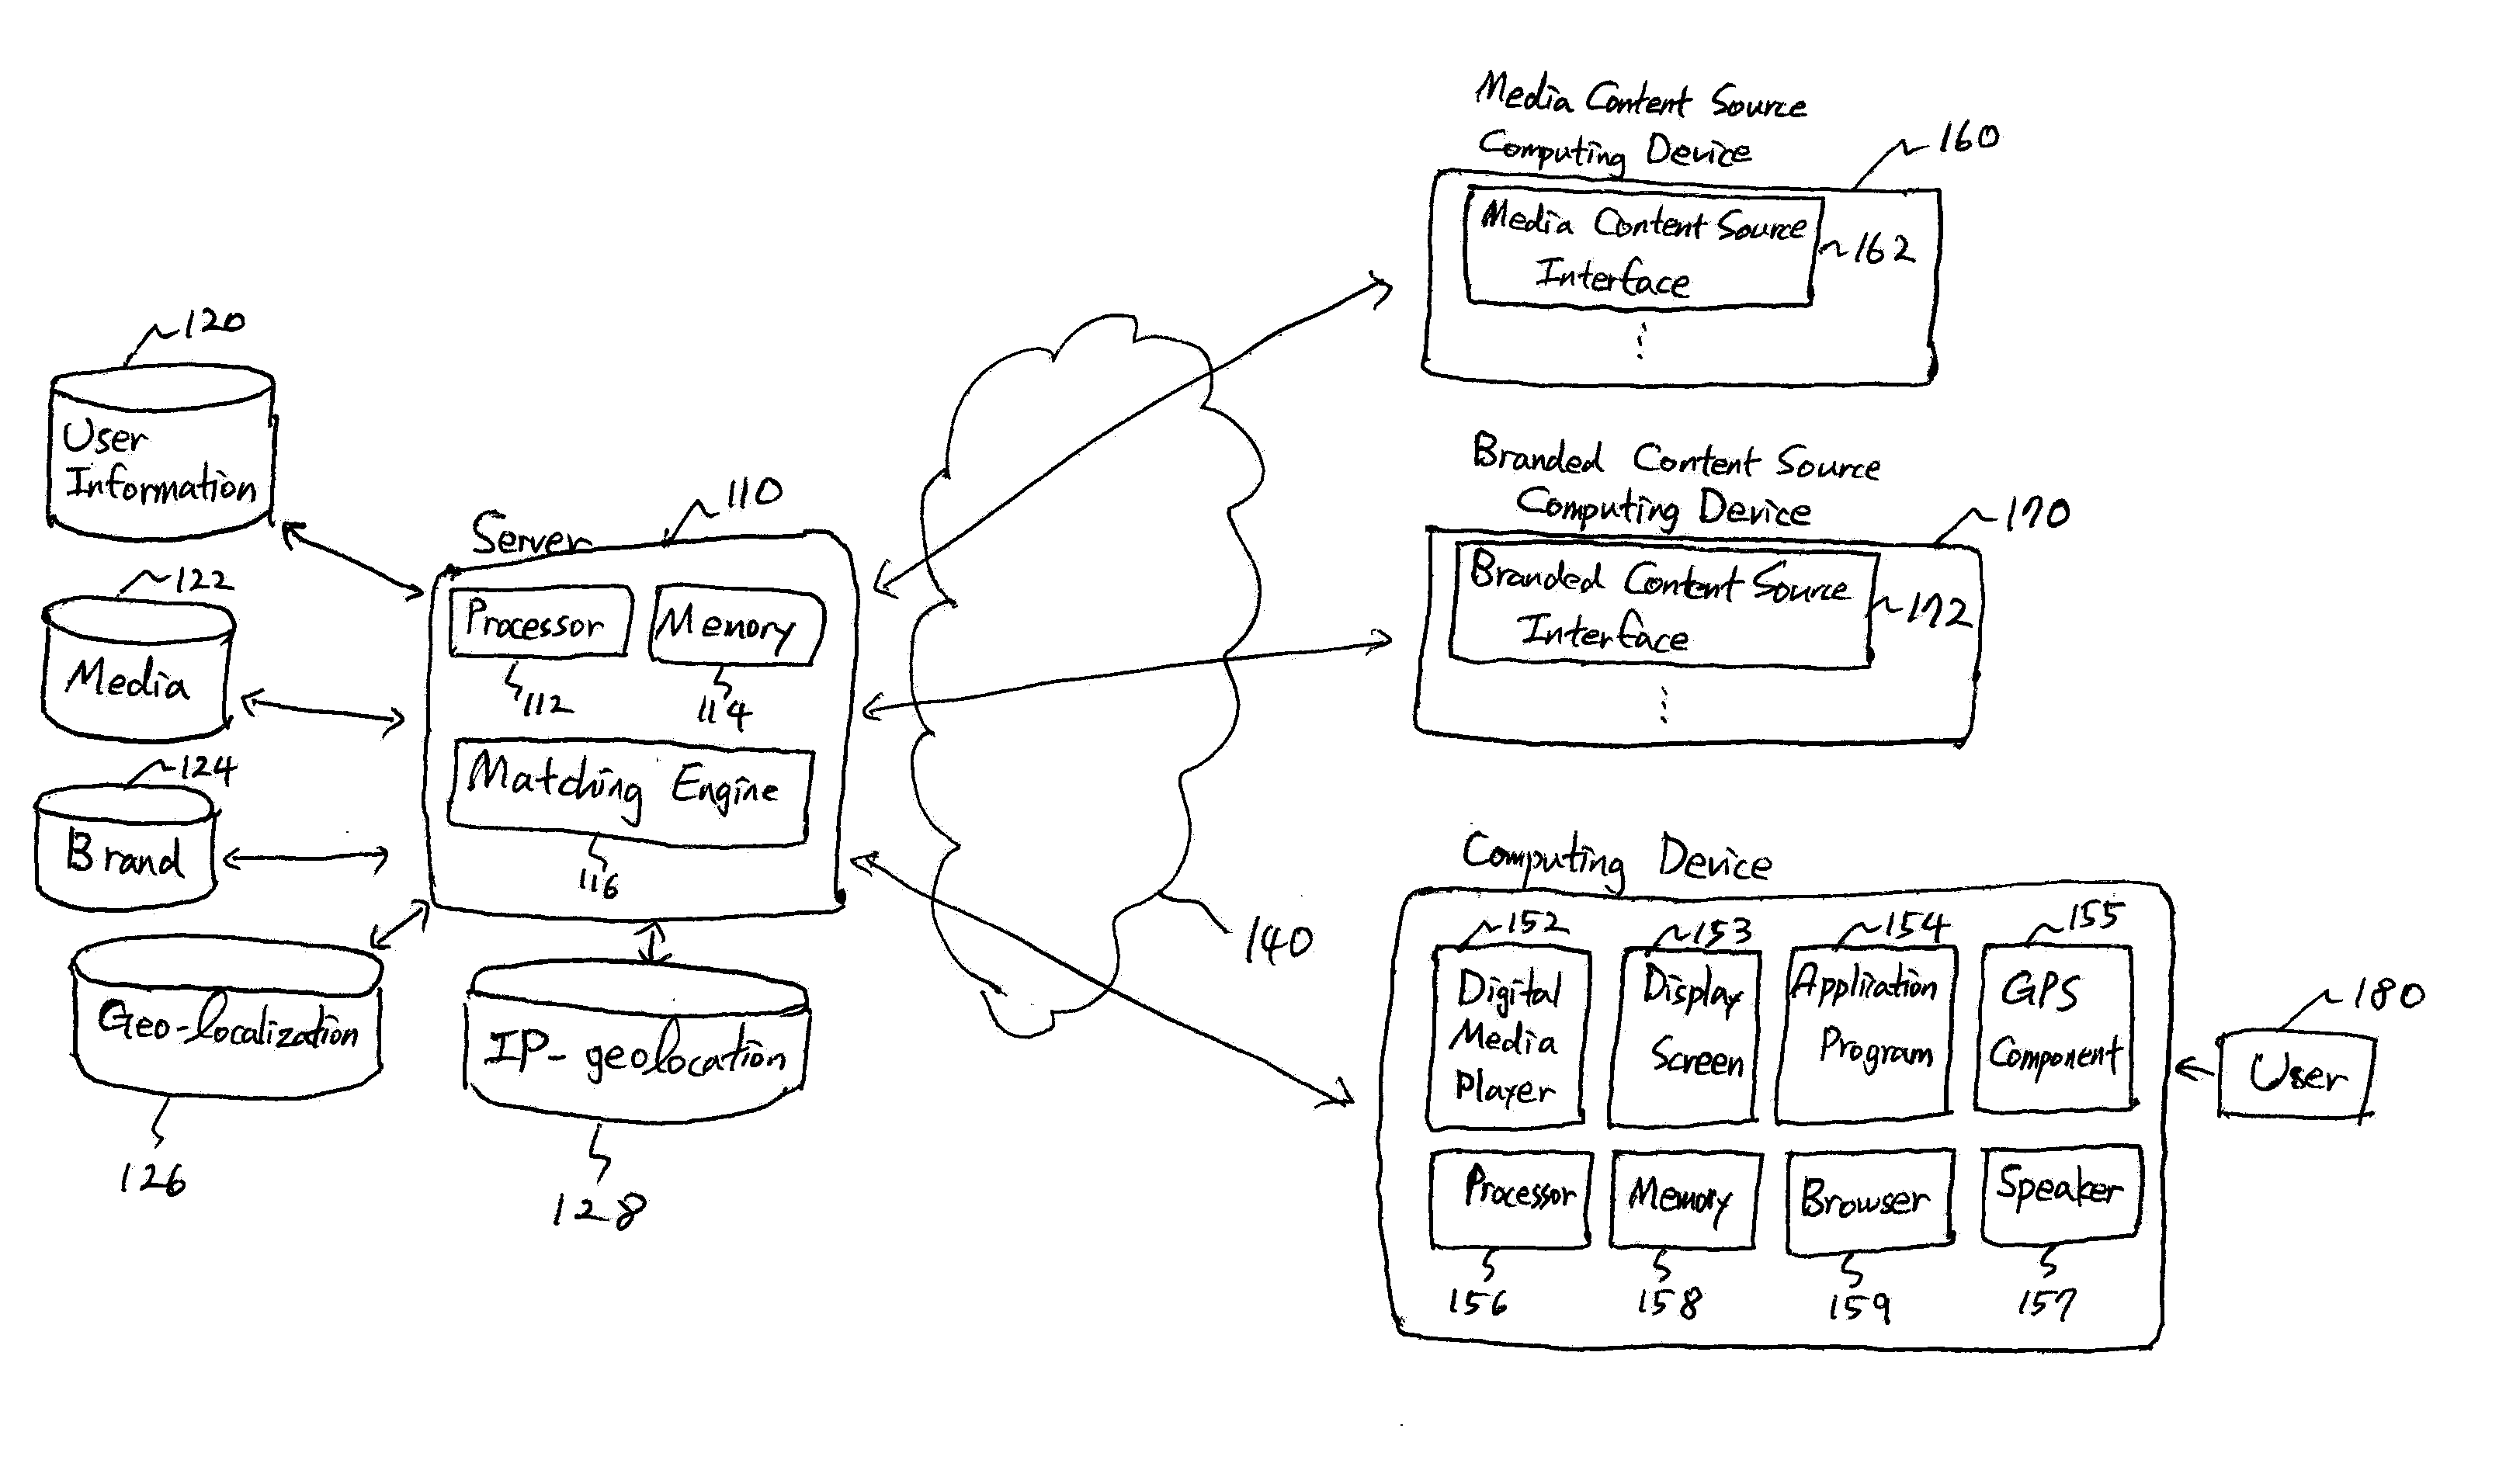 System and Method for Pairing Media Content with Branded Content